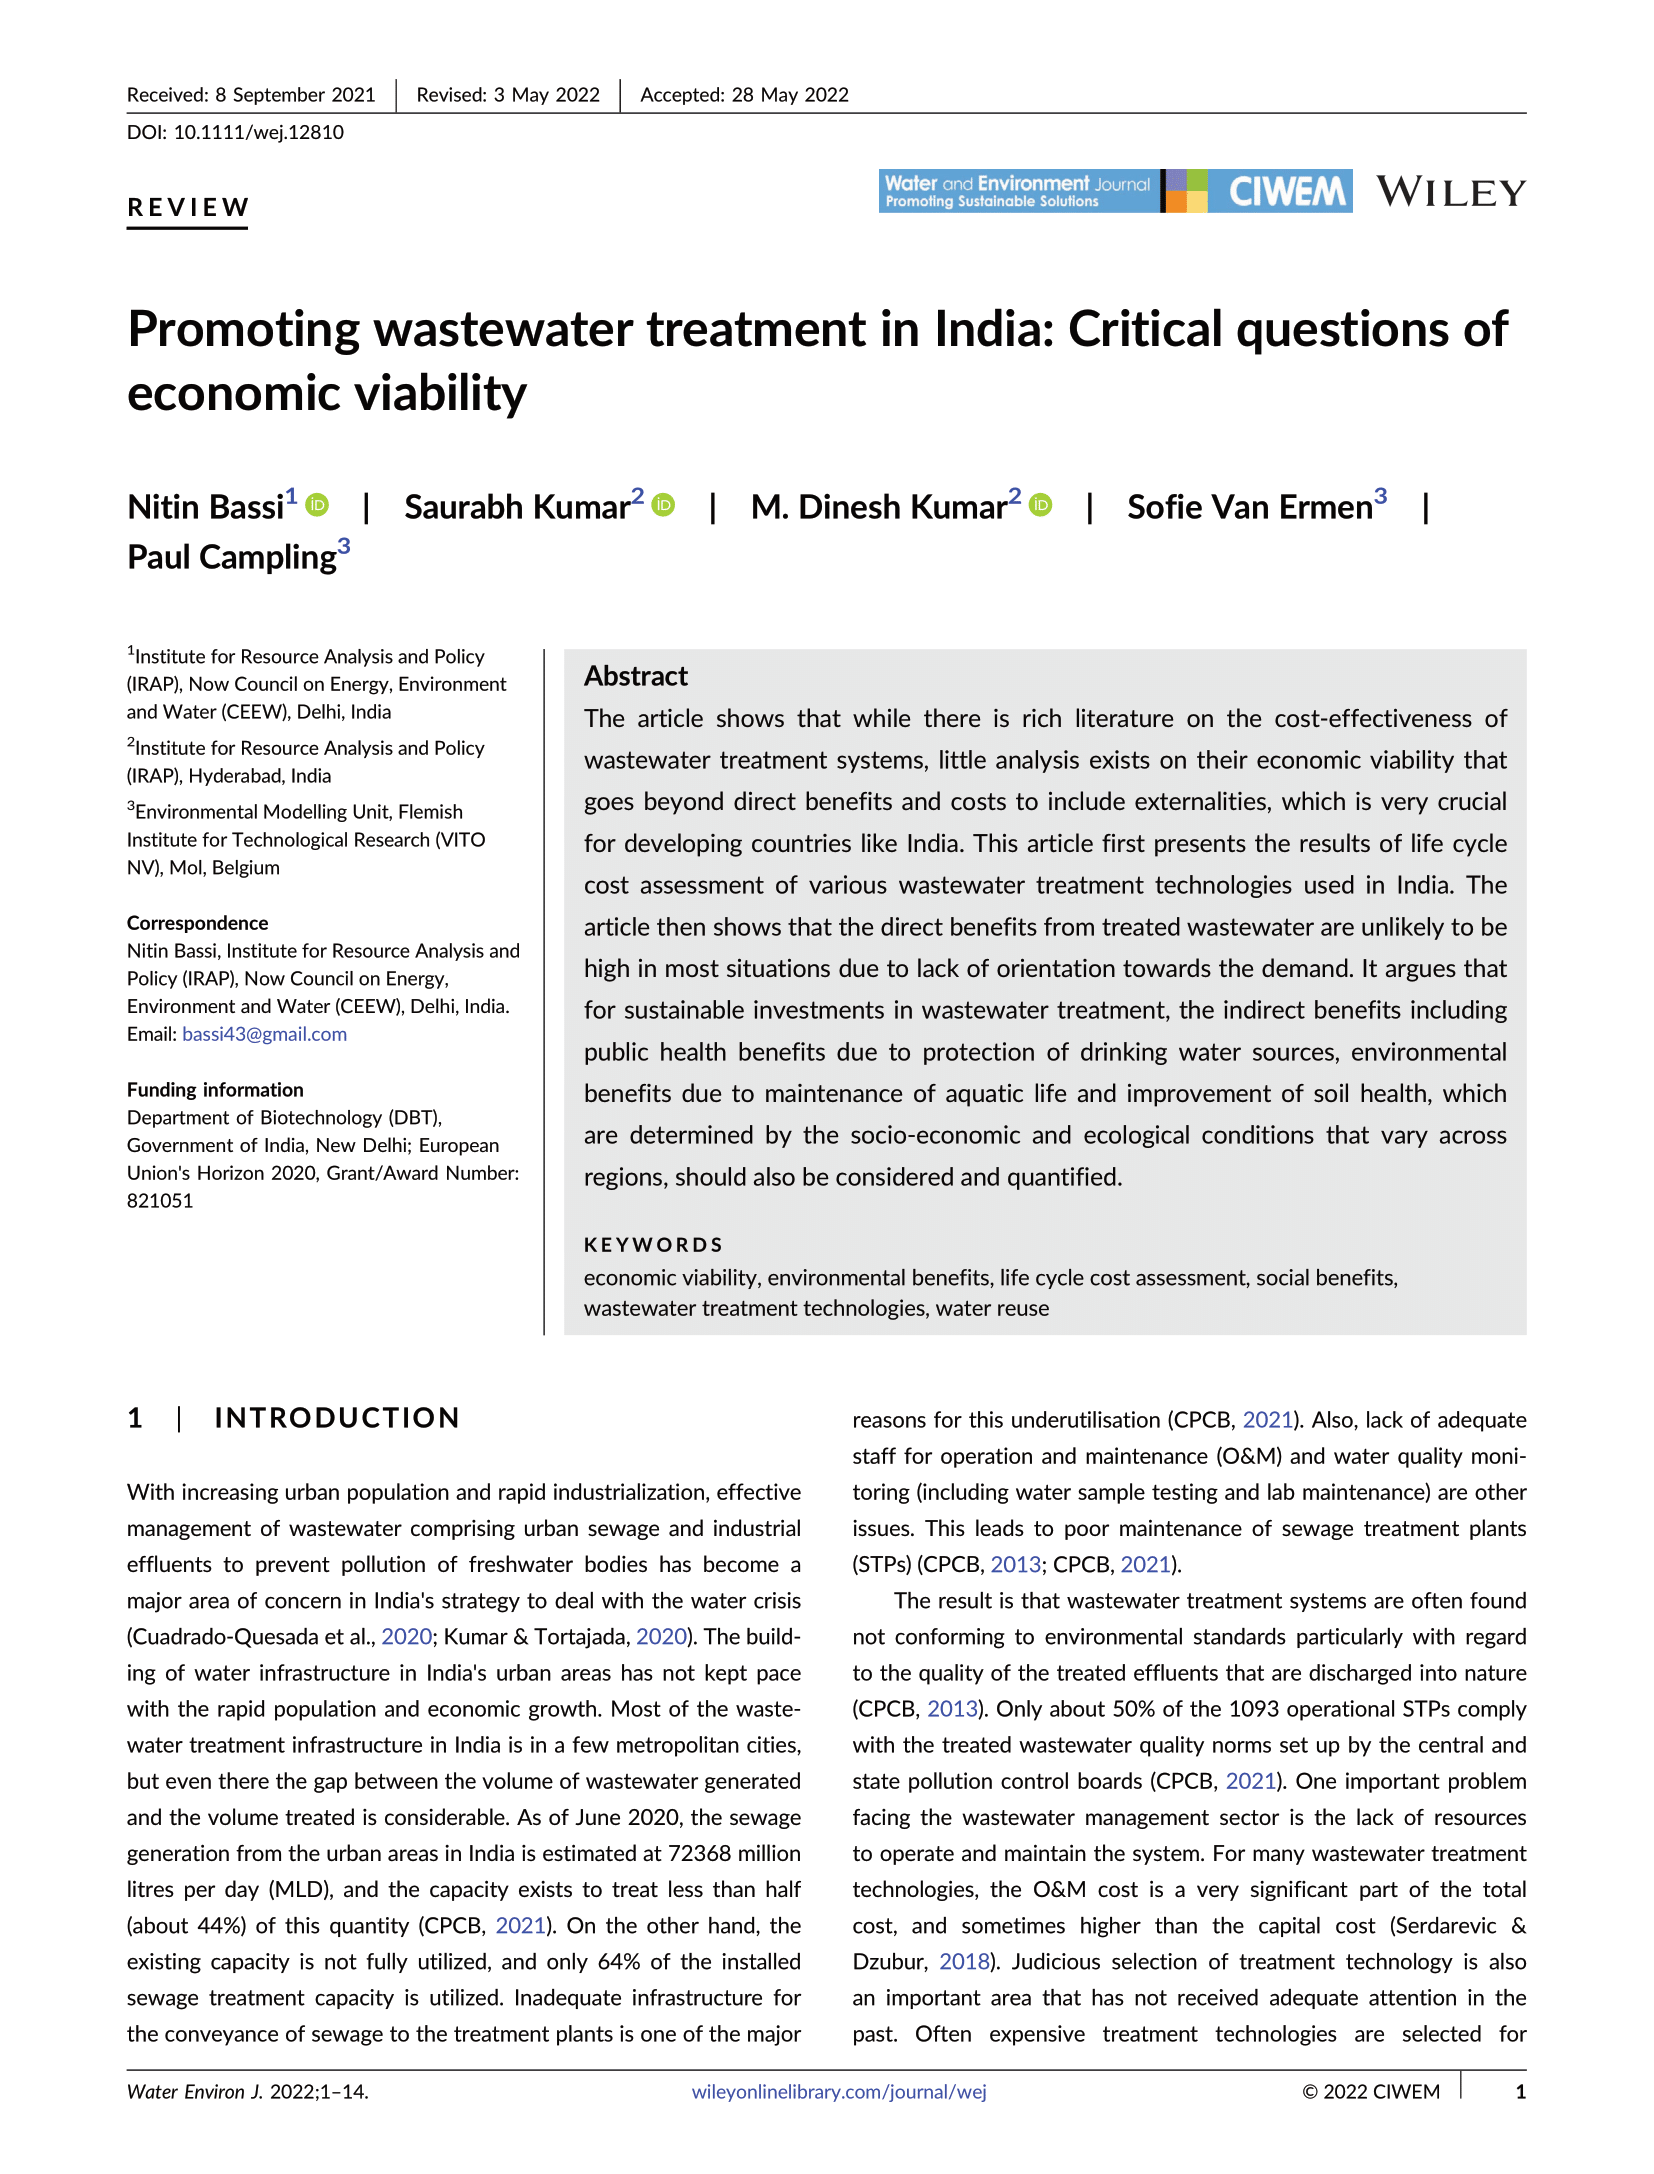 research paper on wastewater treatment in india